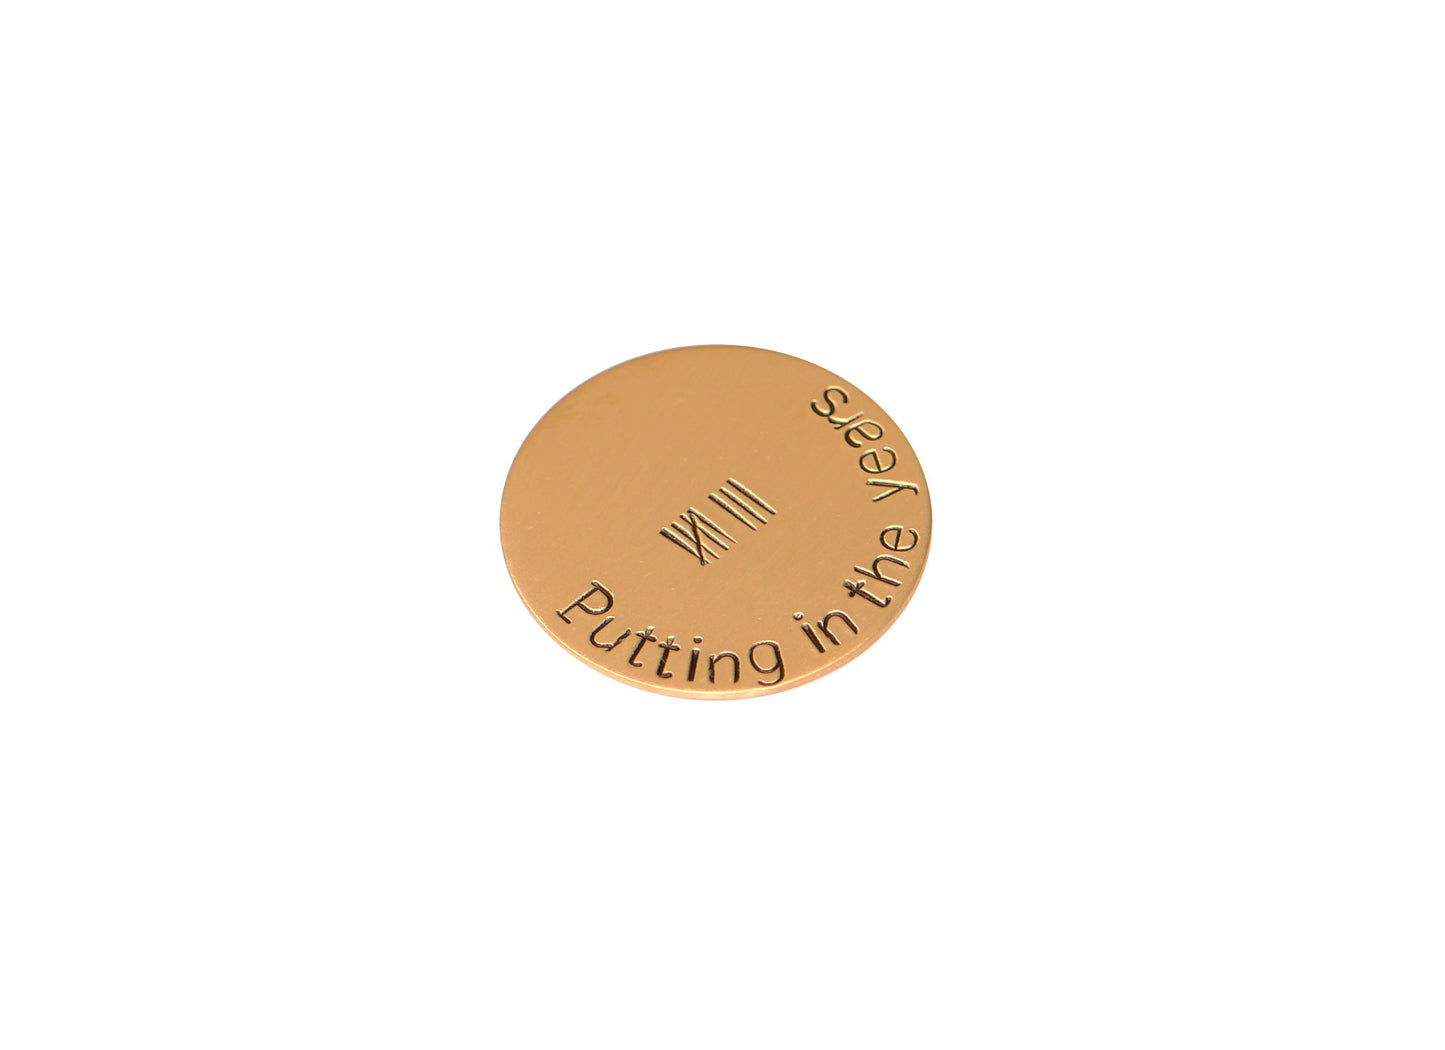 Golf ball marker for 8th or 19th anniversary with "putting in the years and tally marks" in bronze